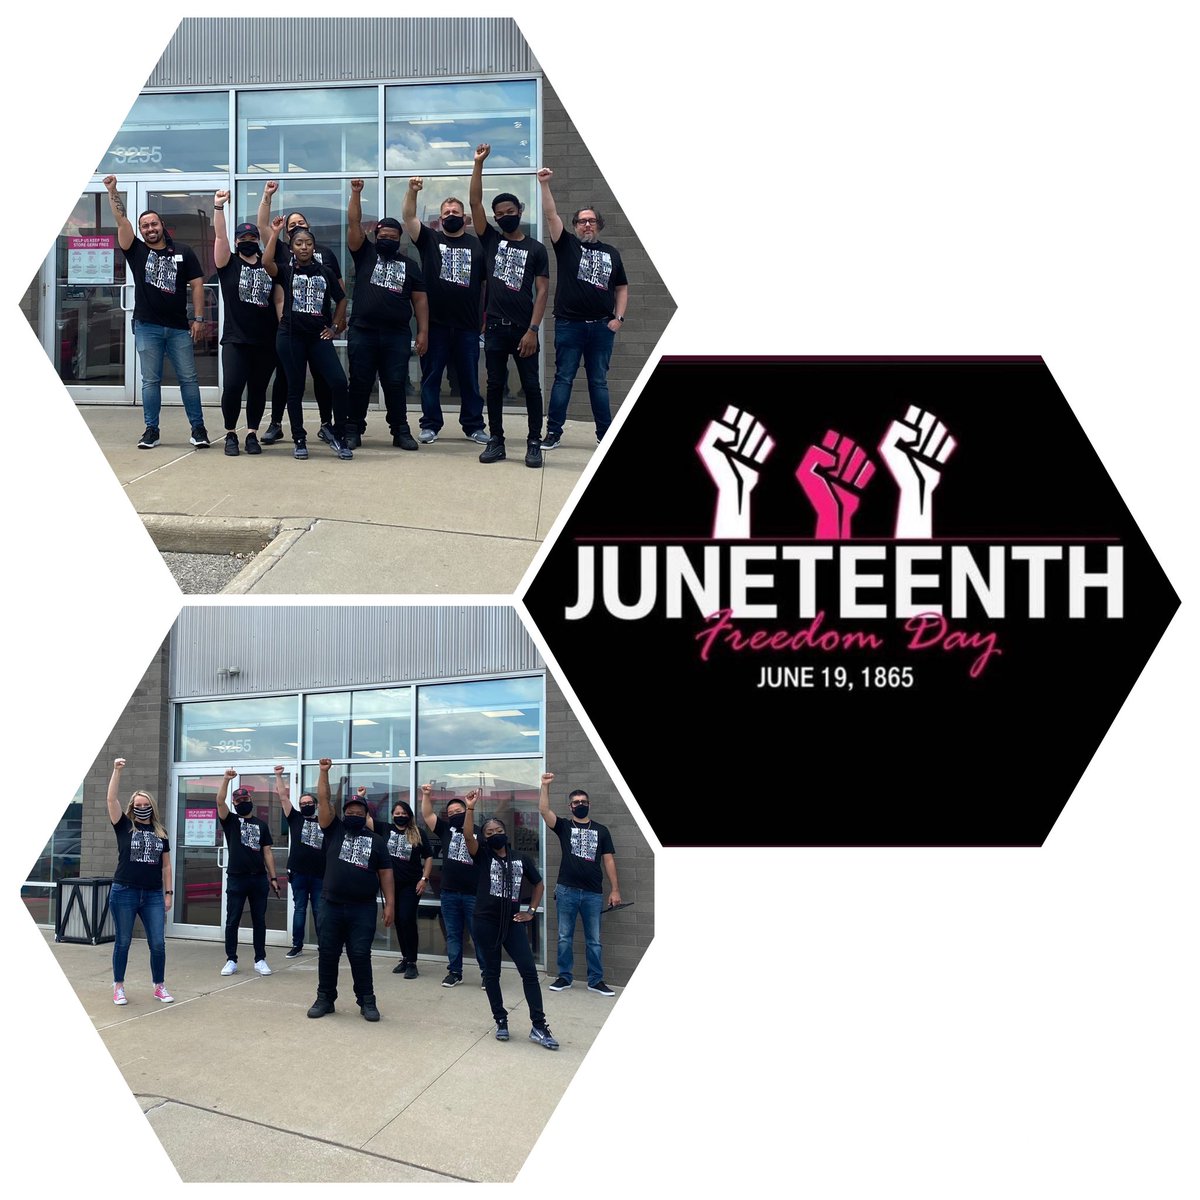 Proud to work for @TMobile where we can stand up in unity for what is right! #JuneTeenth #DifferentTogether 🙏🏼 @Dana_Edwards24 @Heather_Bora for helping Steelyard rep today 💪🏽✊🏽